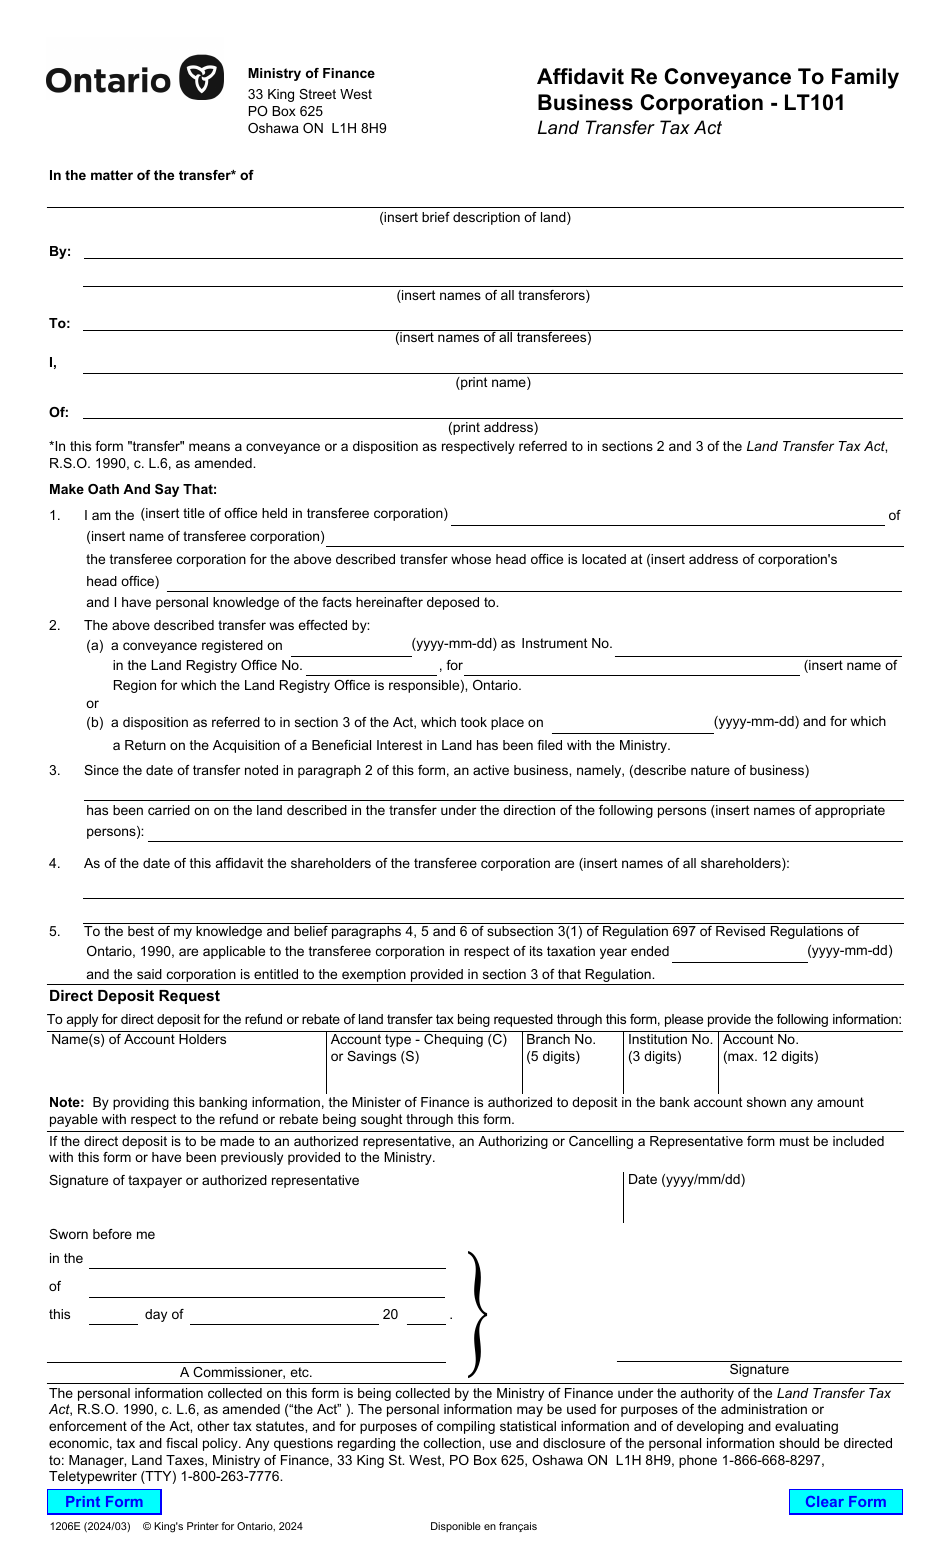 Form LT101 (1206E) Affidavit Re Conveyance to Family Business Corporation - Ontario, Canada, Page 1